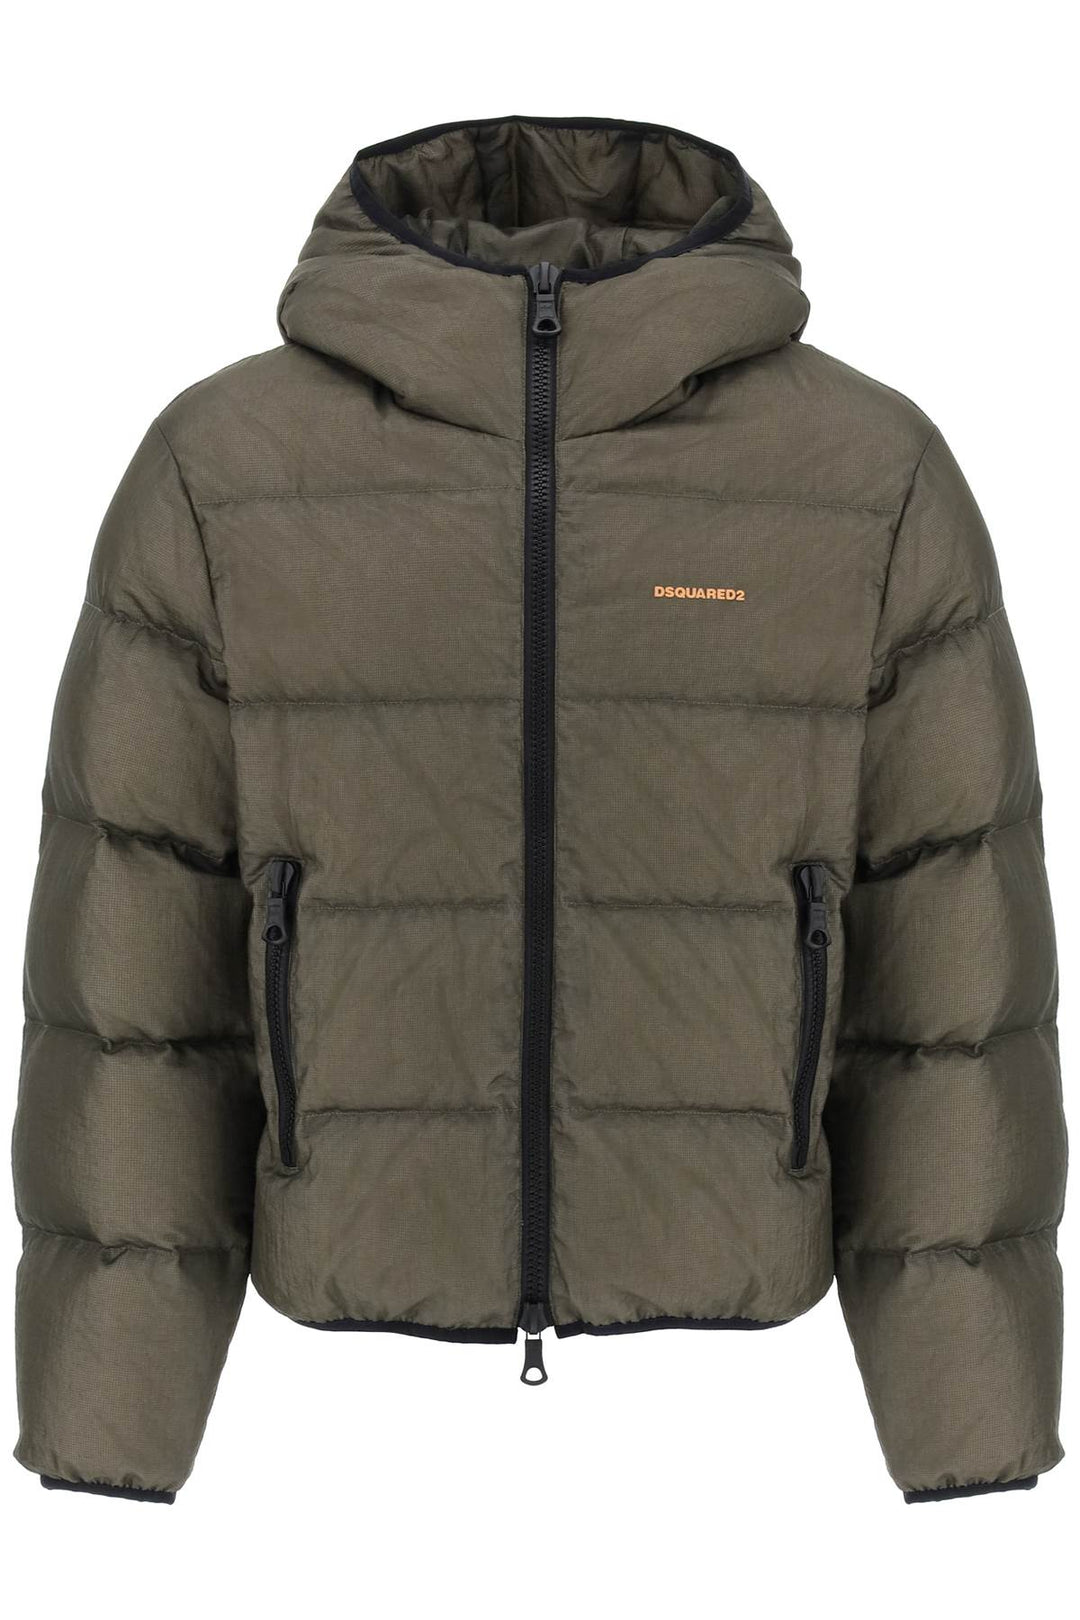 Dsquared2 ripstop puffer jacket-0